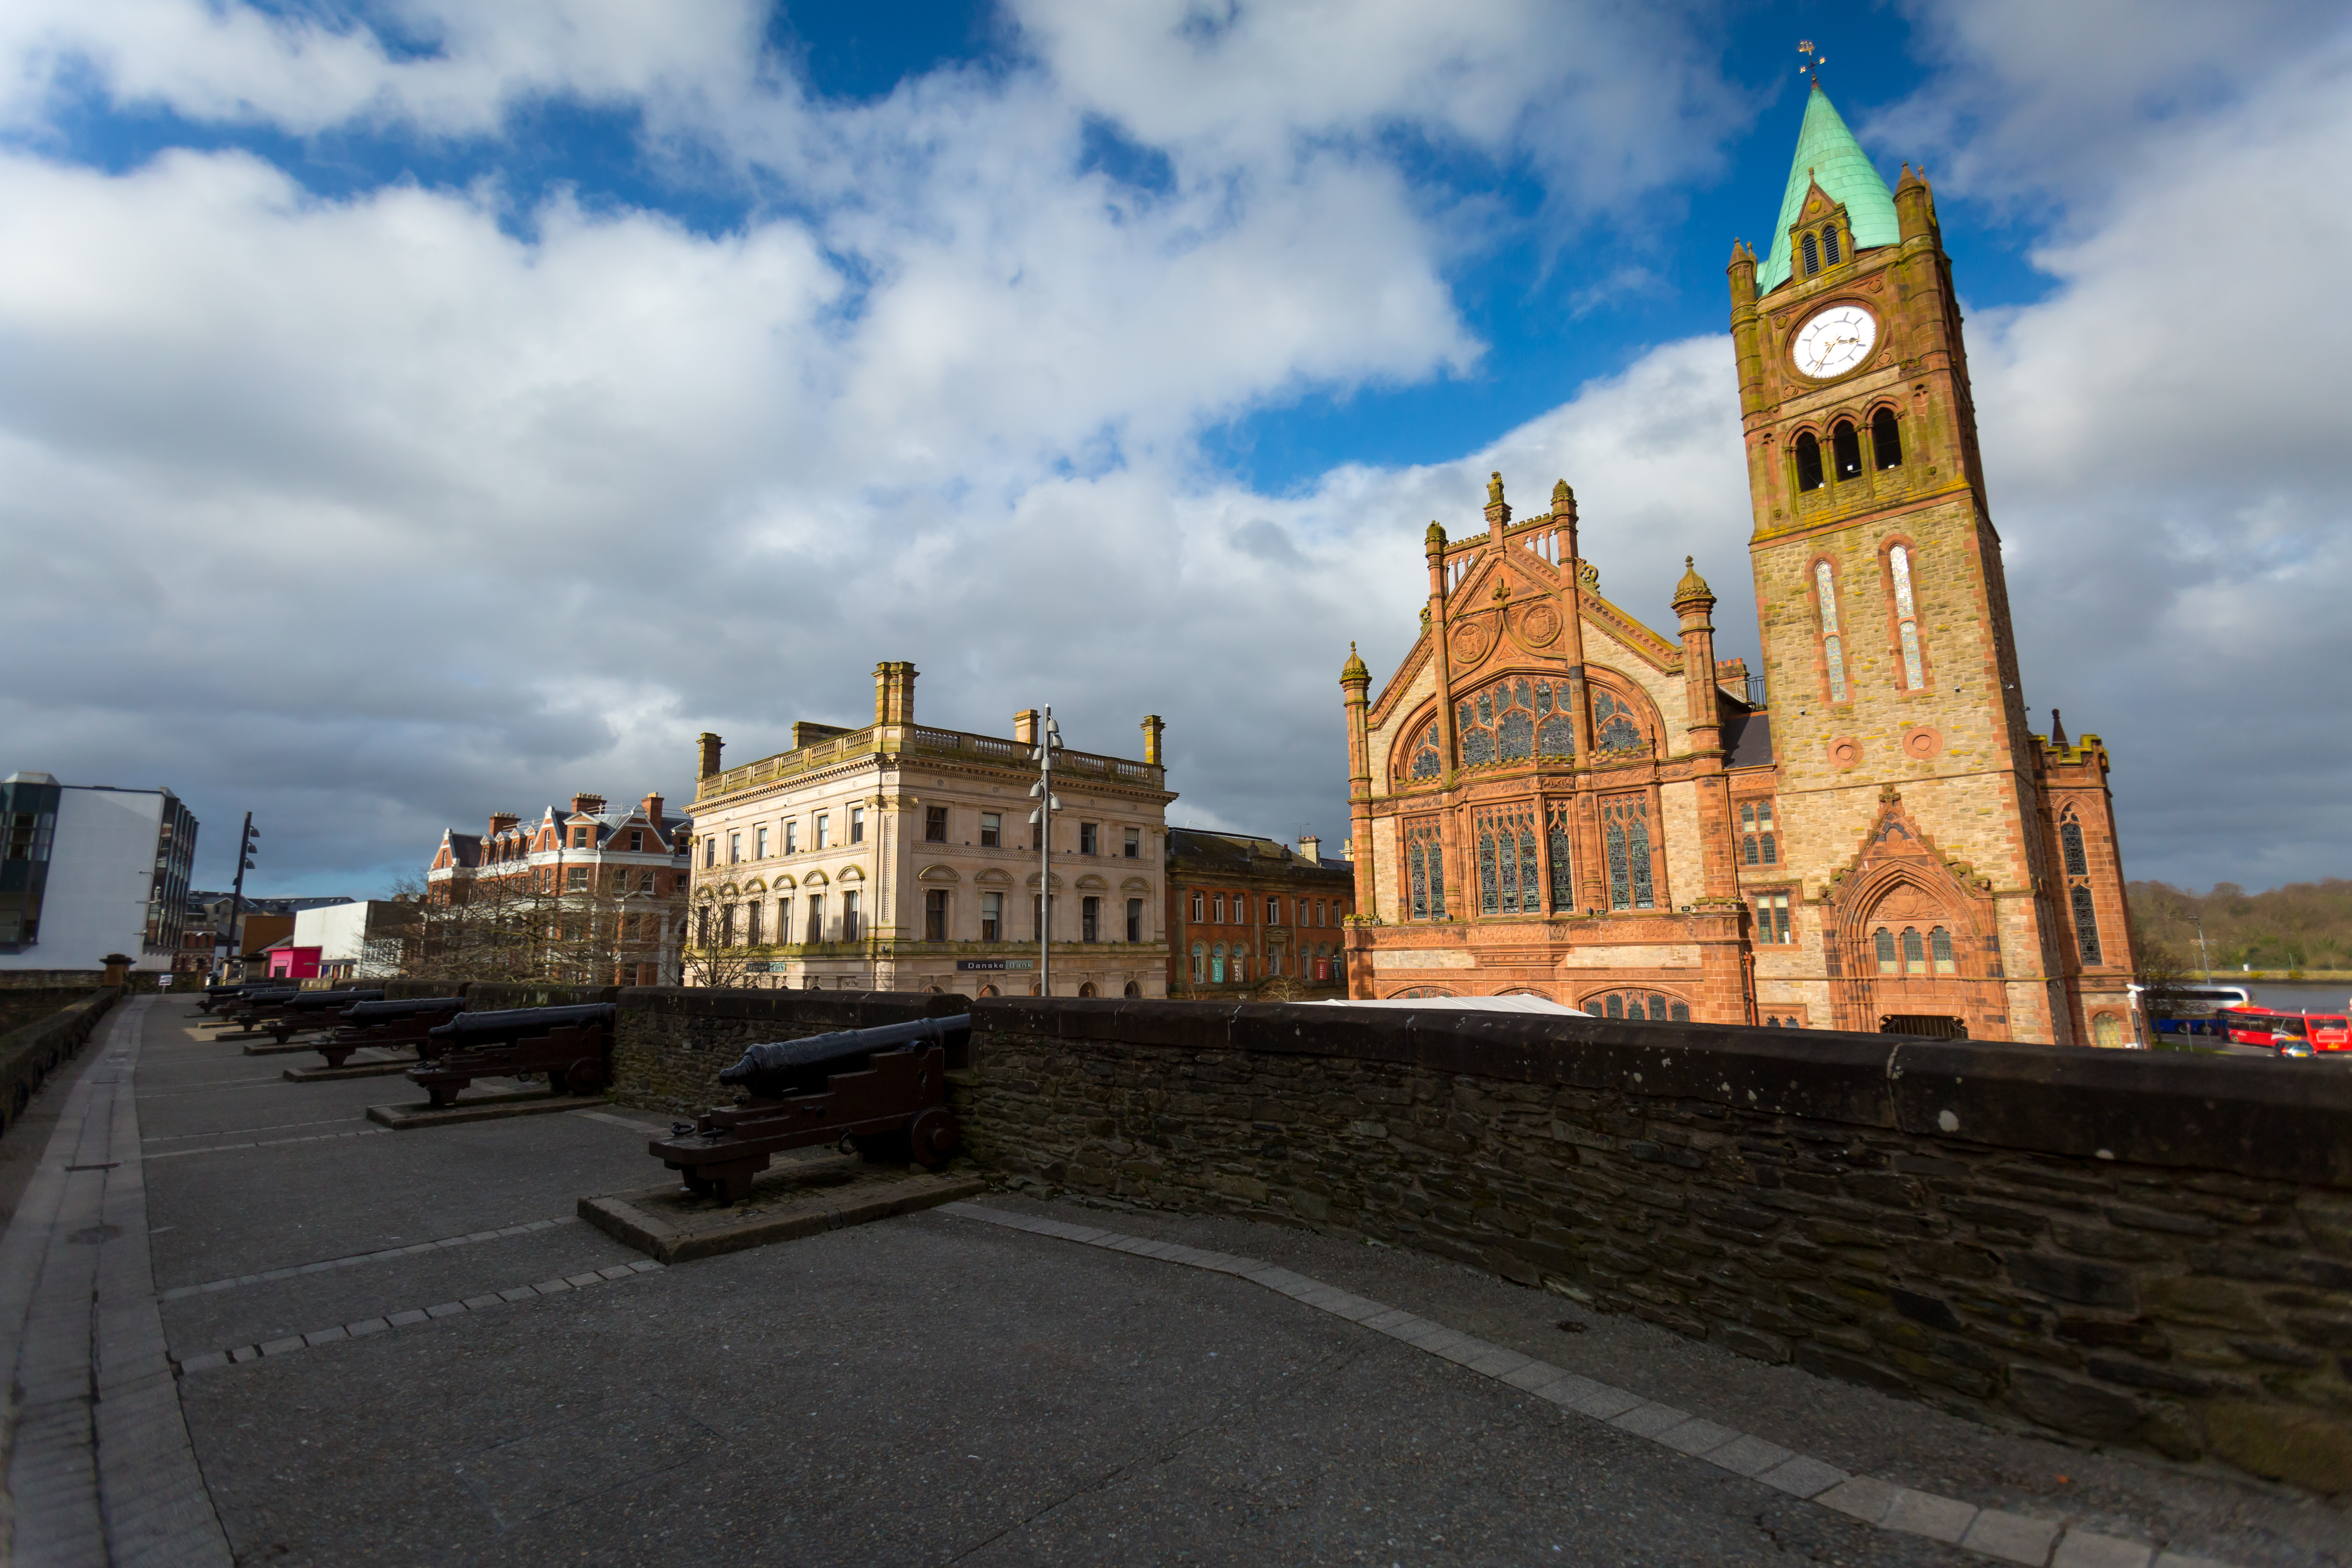 Built in 1890, The Guildhall in Derry, County Londonderry, Northern Ireland, is a building in which the elected members of Derry and Strabane District Council meet.